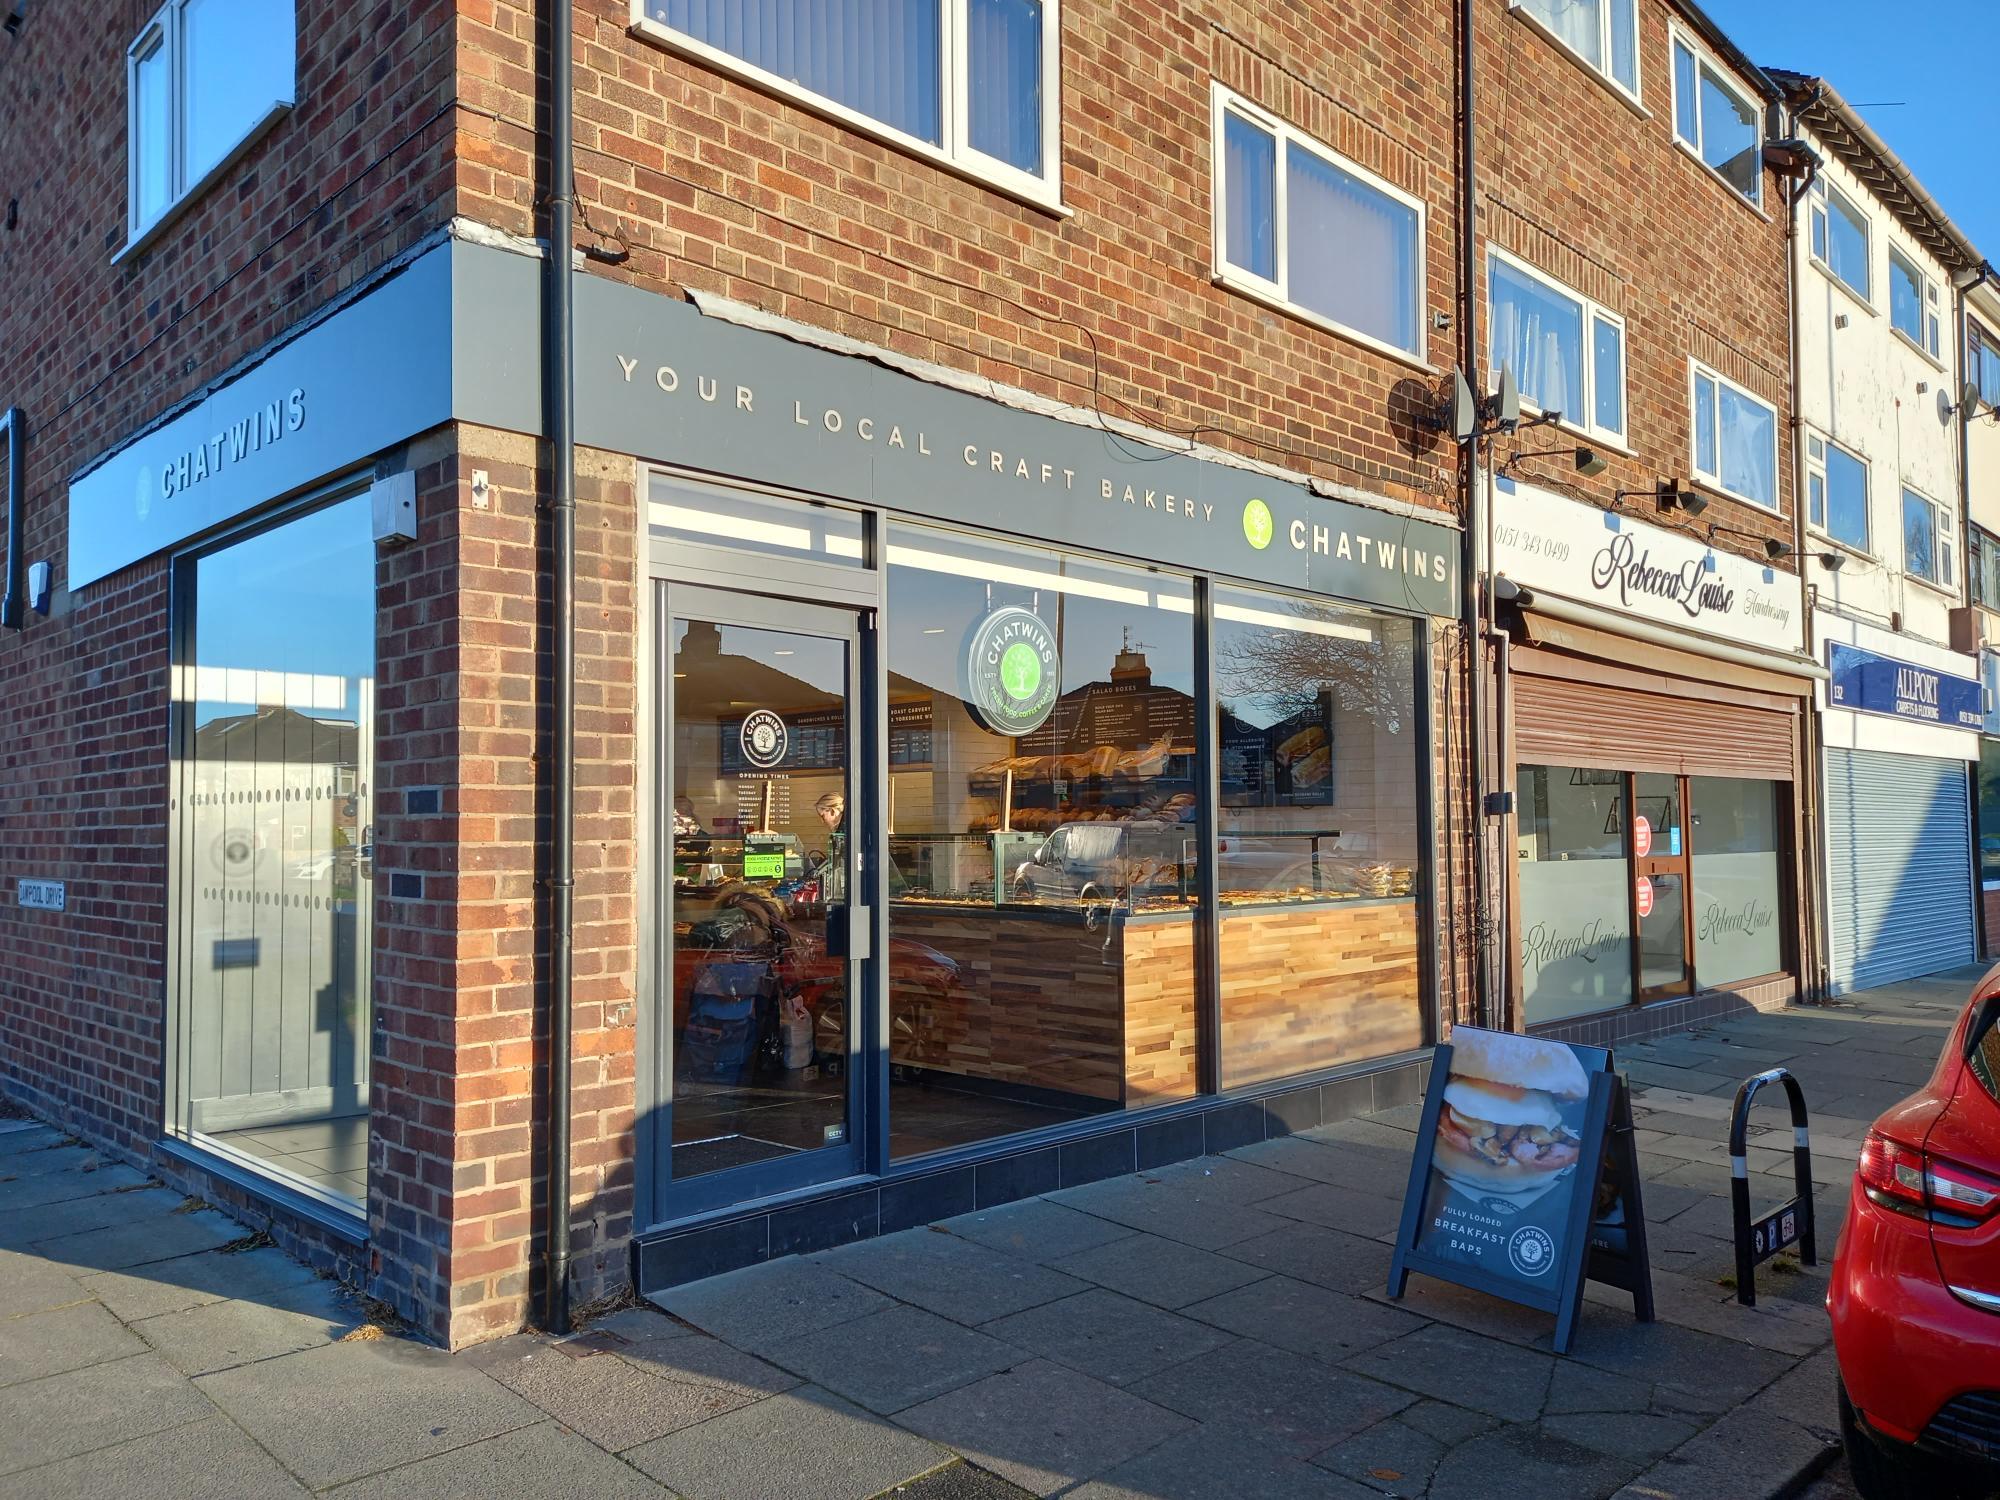 More footfall has been driven to Allport Road after Chatwins Bakery opened in the summer